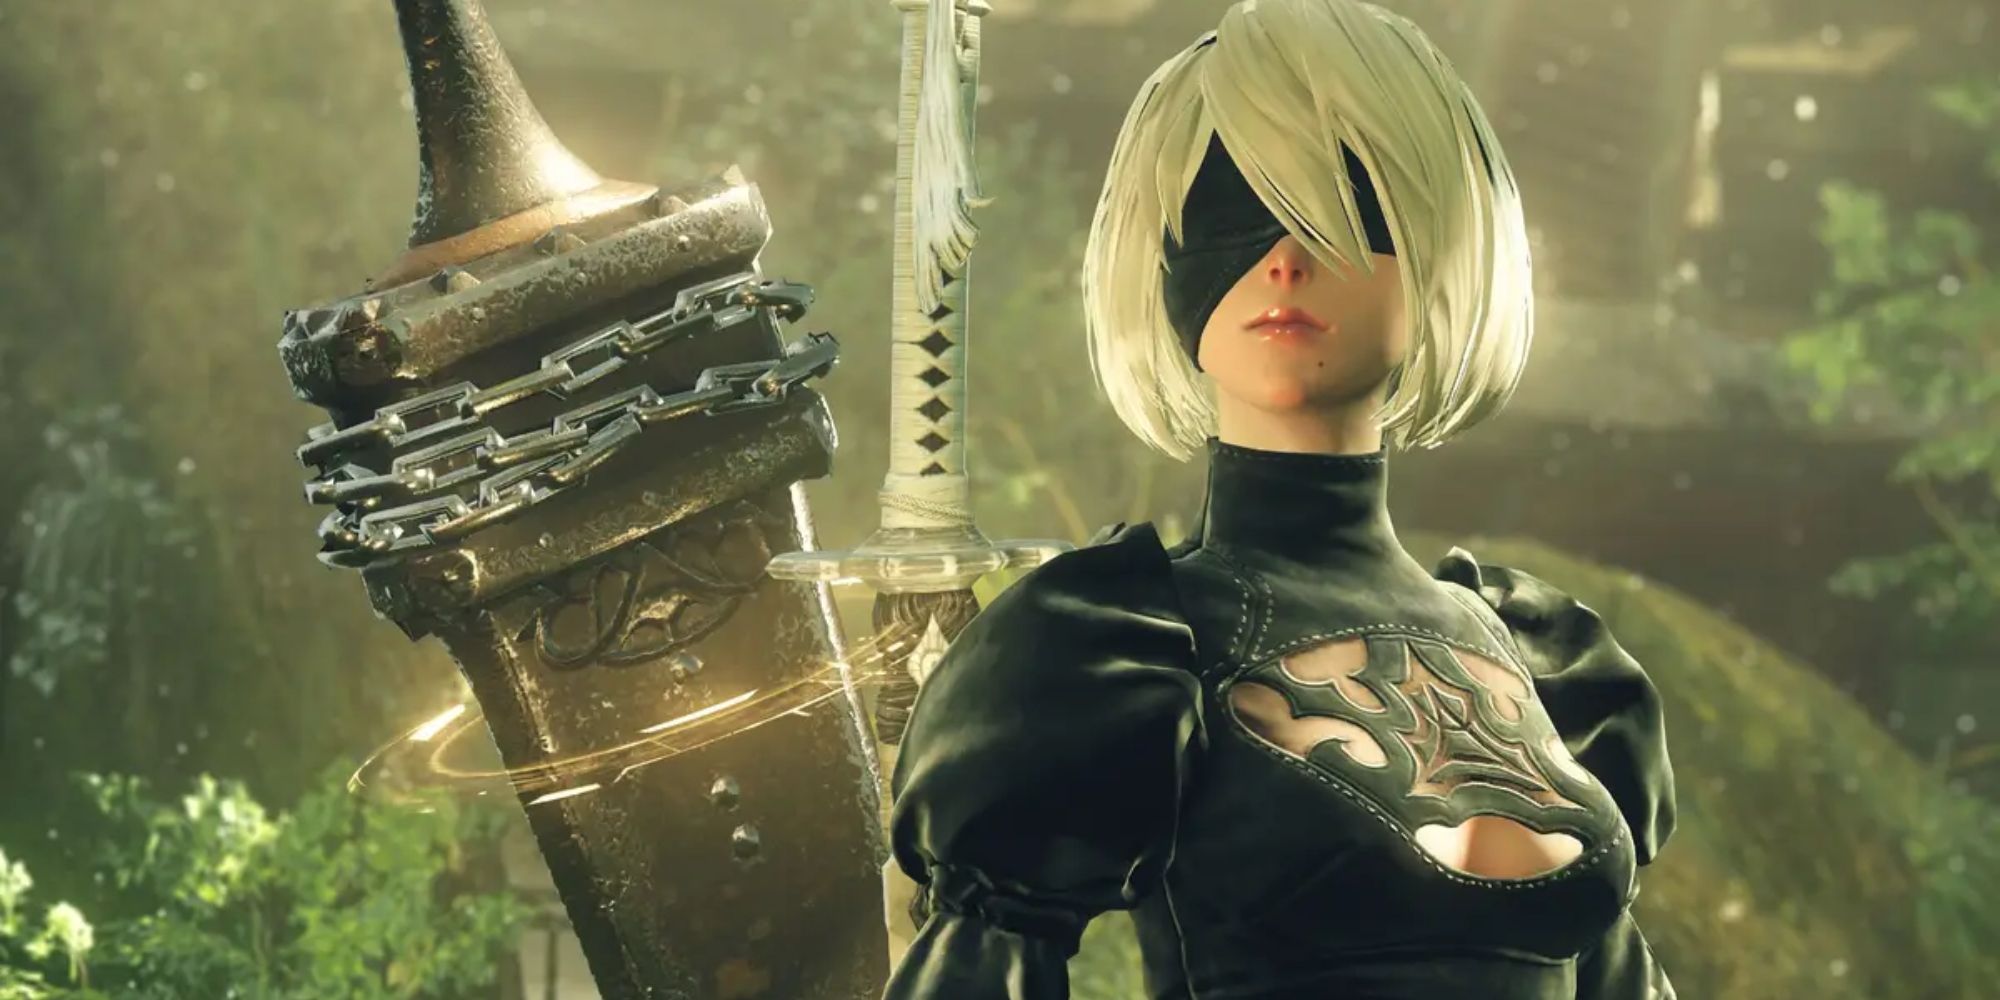 An image of NieR: Automata, depicting 2B: one of the main protagonists.